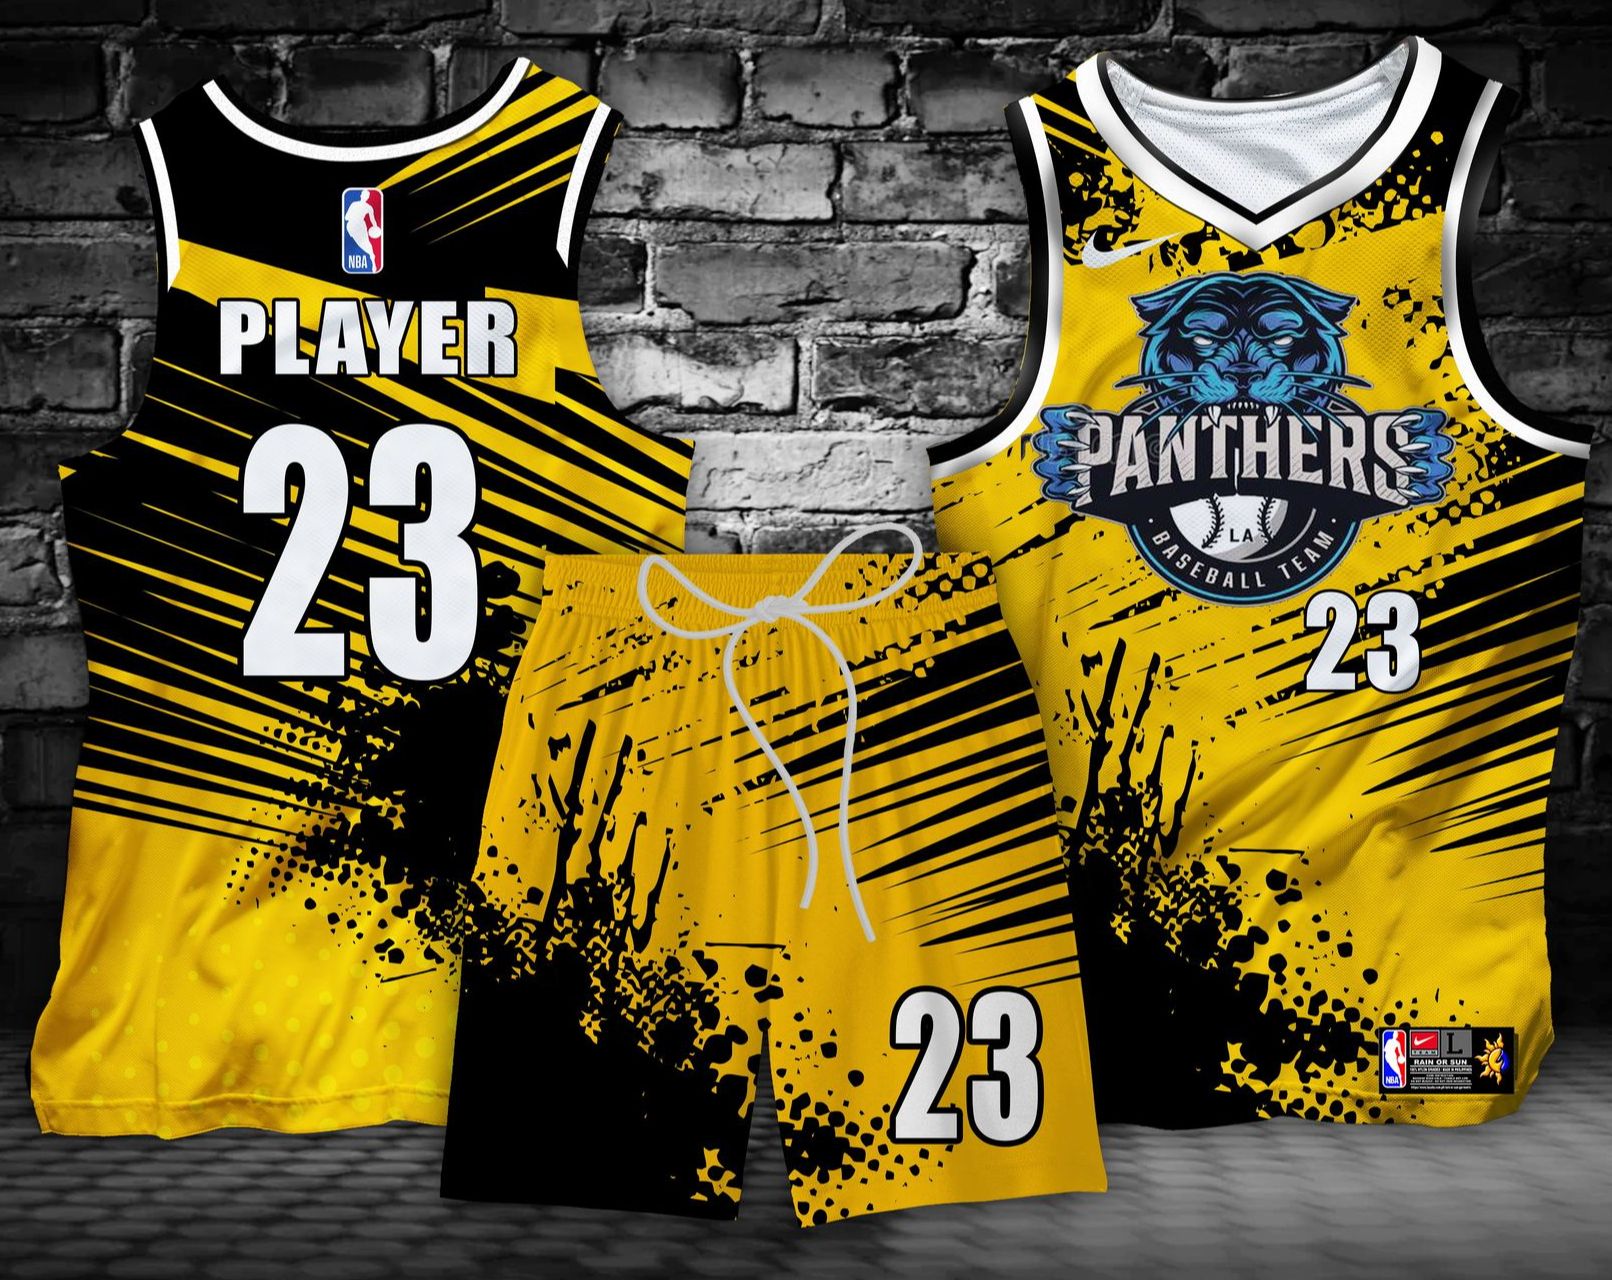 PANTHERS 01 YELLOW TERNO JERSEY FREE CUSTOMIZE OF NAME & NUMBER full sublimation high quality fabrics/ new trend jersey | Lazada PH